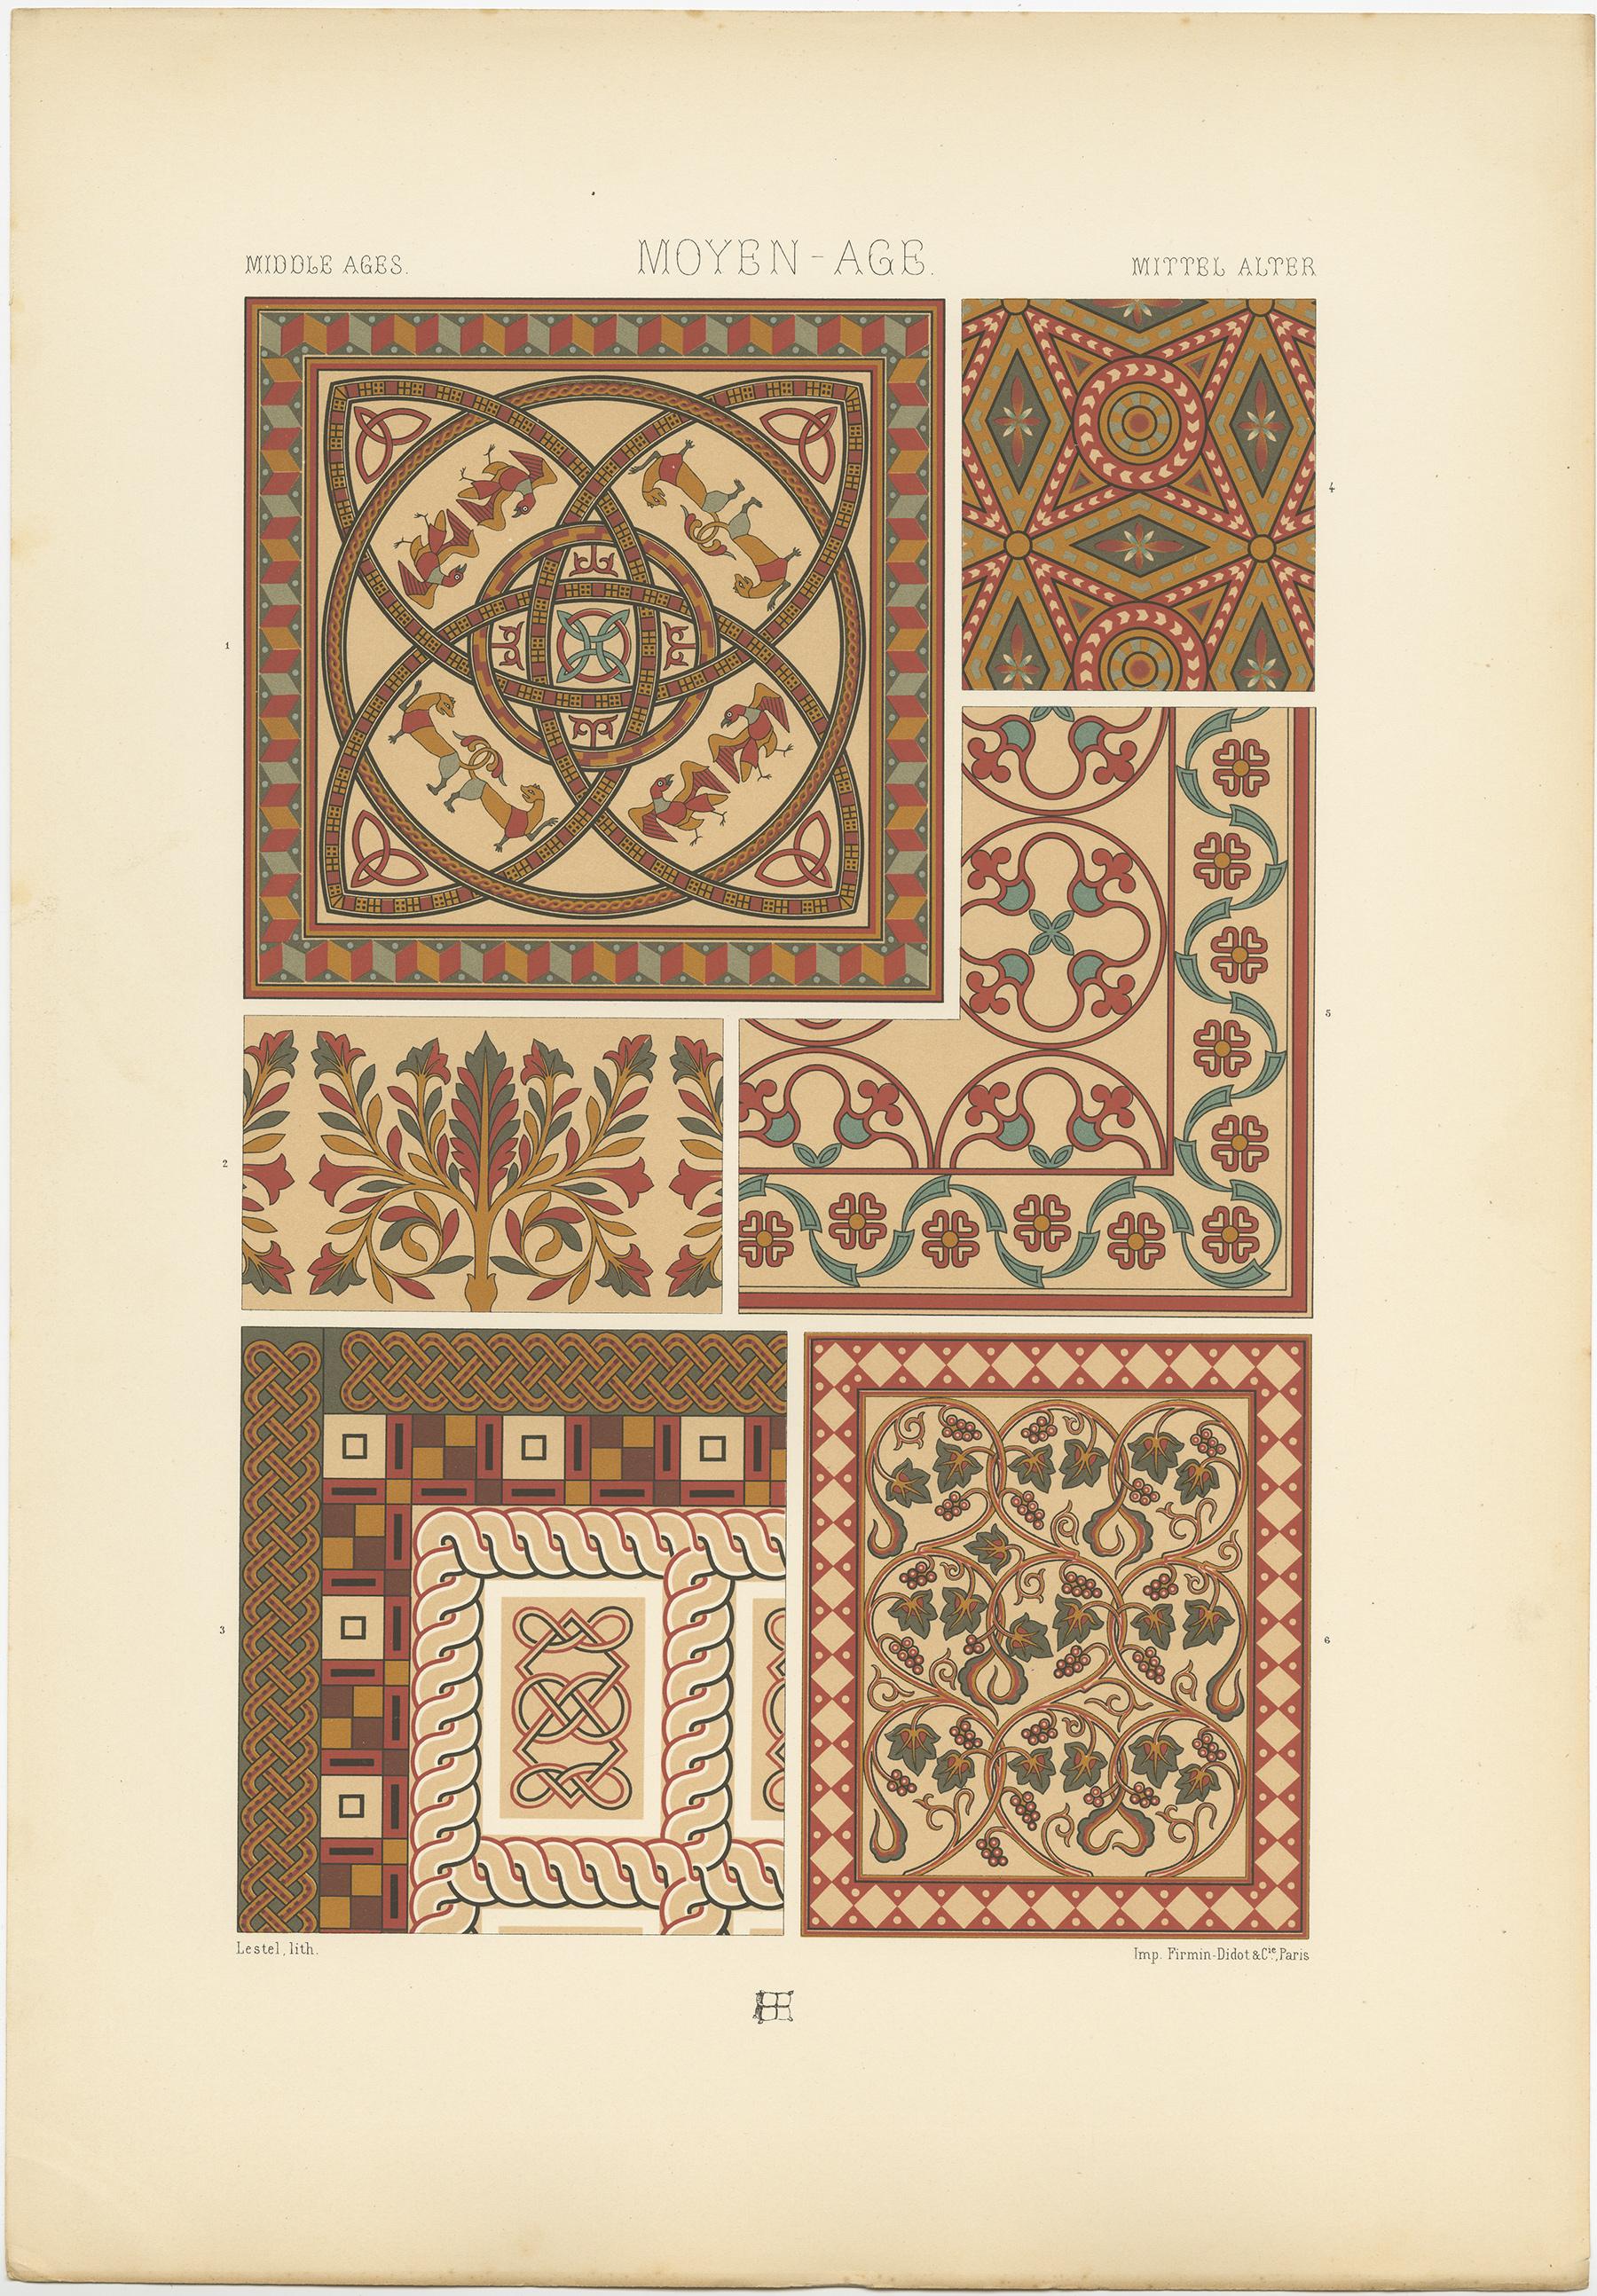 Antique print titled 'Middle Ages - Moyen Age - Mittel Alter'. Chromolithograph of mosaic design, France, late Roman to Romanesque periods
ornaments. This print originates from 'l'Ornement Polychrome' by Auguste Racinet. Published circa 1890.